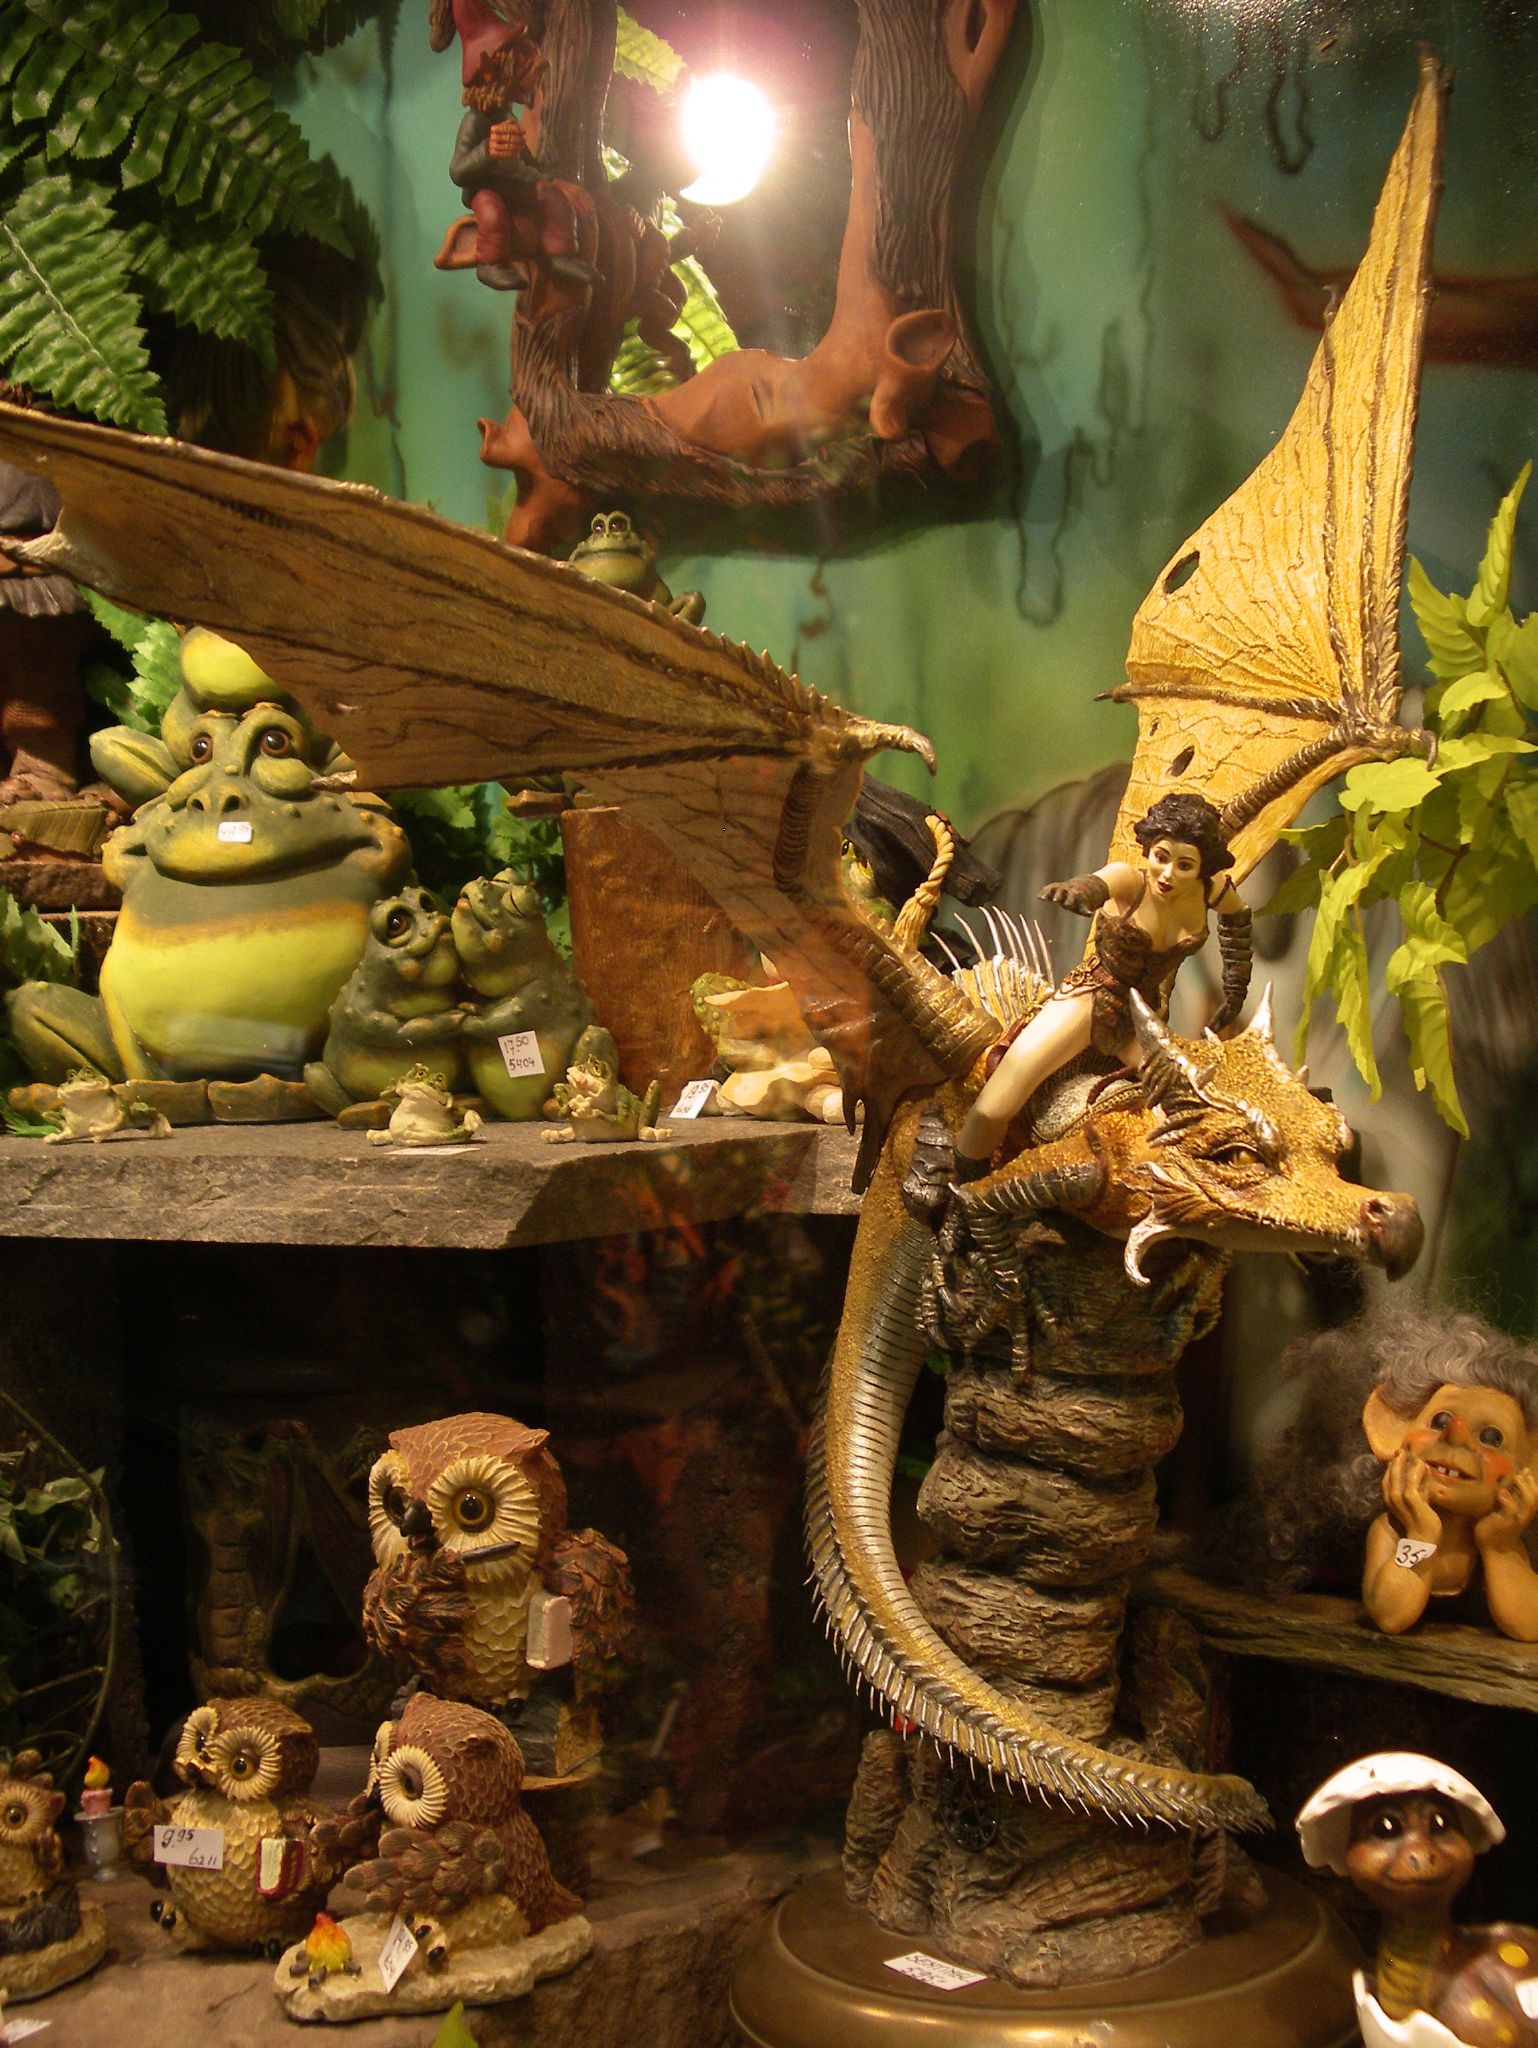 a fairy tale scene in yellow with toy figurines and figurines